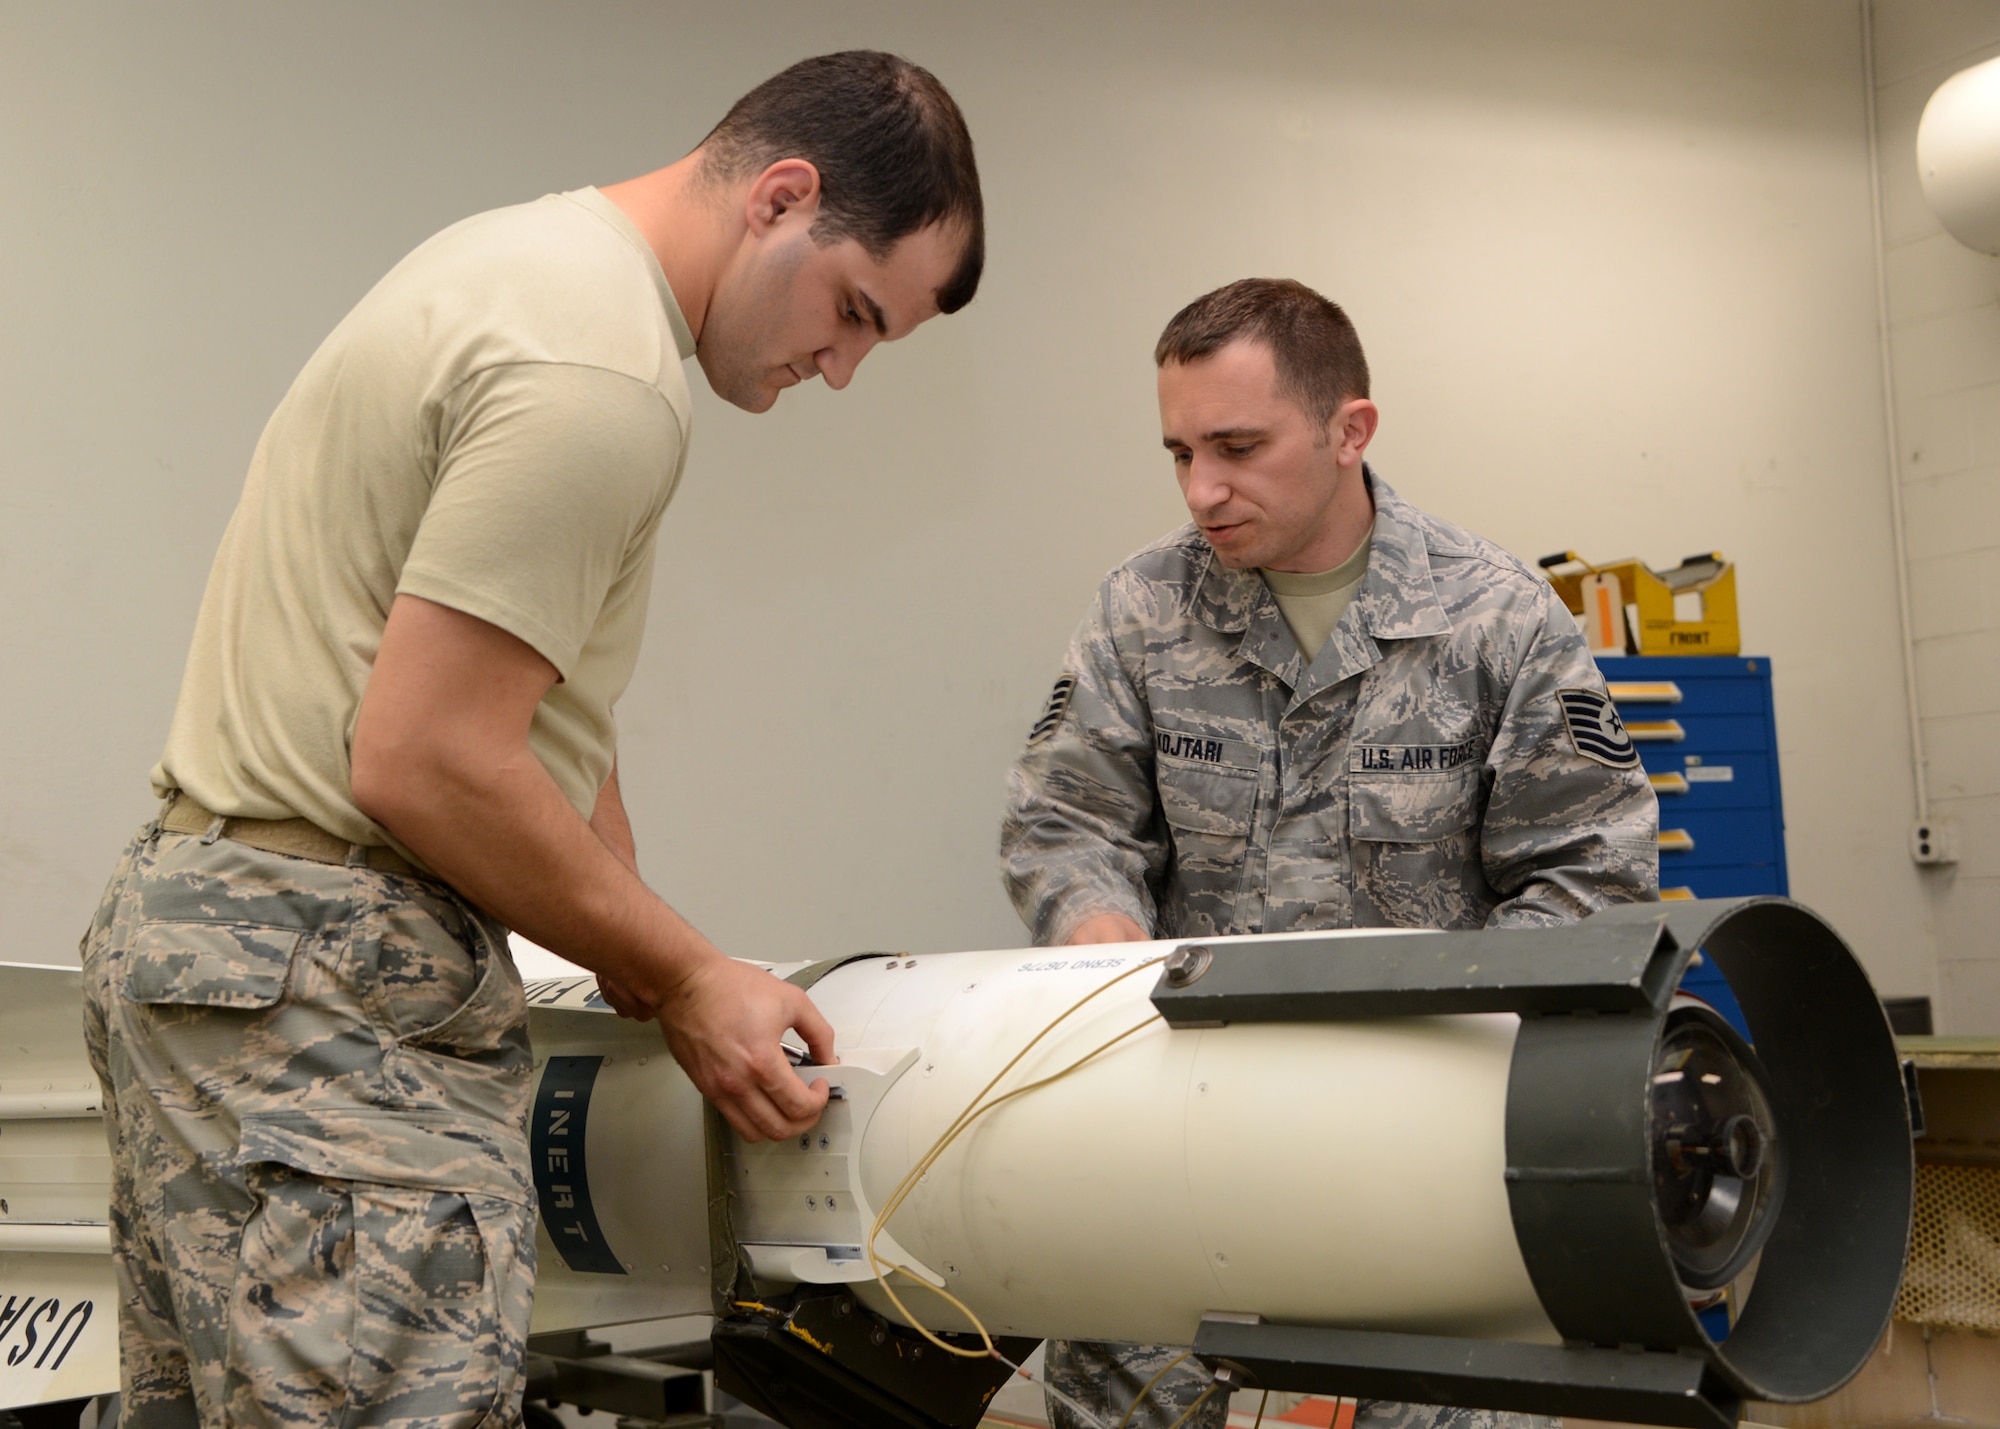 U.S. Air Force Tech. Sgt. Ilir Kojtari (right), 175th Maintenance Squadron precision guided munitions section non-commissioned officer in charge (NCOIC), 175th Wing Maryland Air National Guard, and U.S. Air Force Senior Airman Adam Ahern, 175th Maintenance Squadron munitions specialist, 175th Wing Maryland Air National Guard, attach a hoisting adapter to an AGM-65A missile maintenance trainer while preparing to remove the Guidance Control Unit (GCS) from the body of the missile.  Kojtari was training Ahern on the proper removal procedures for the Guidance Control Unit (GCS) of an AGM-65A missile.  (U.S. Air National Guard photo by Tech. Sgt. Christopher Schepers/RELEASED)